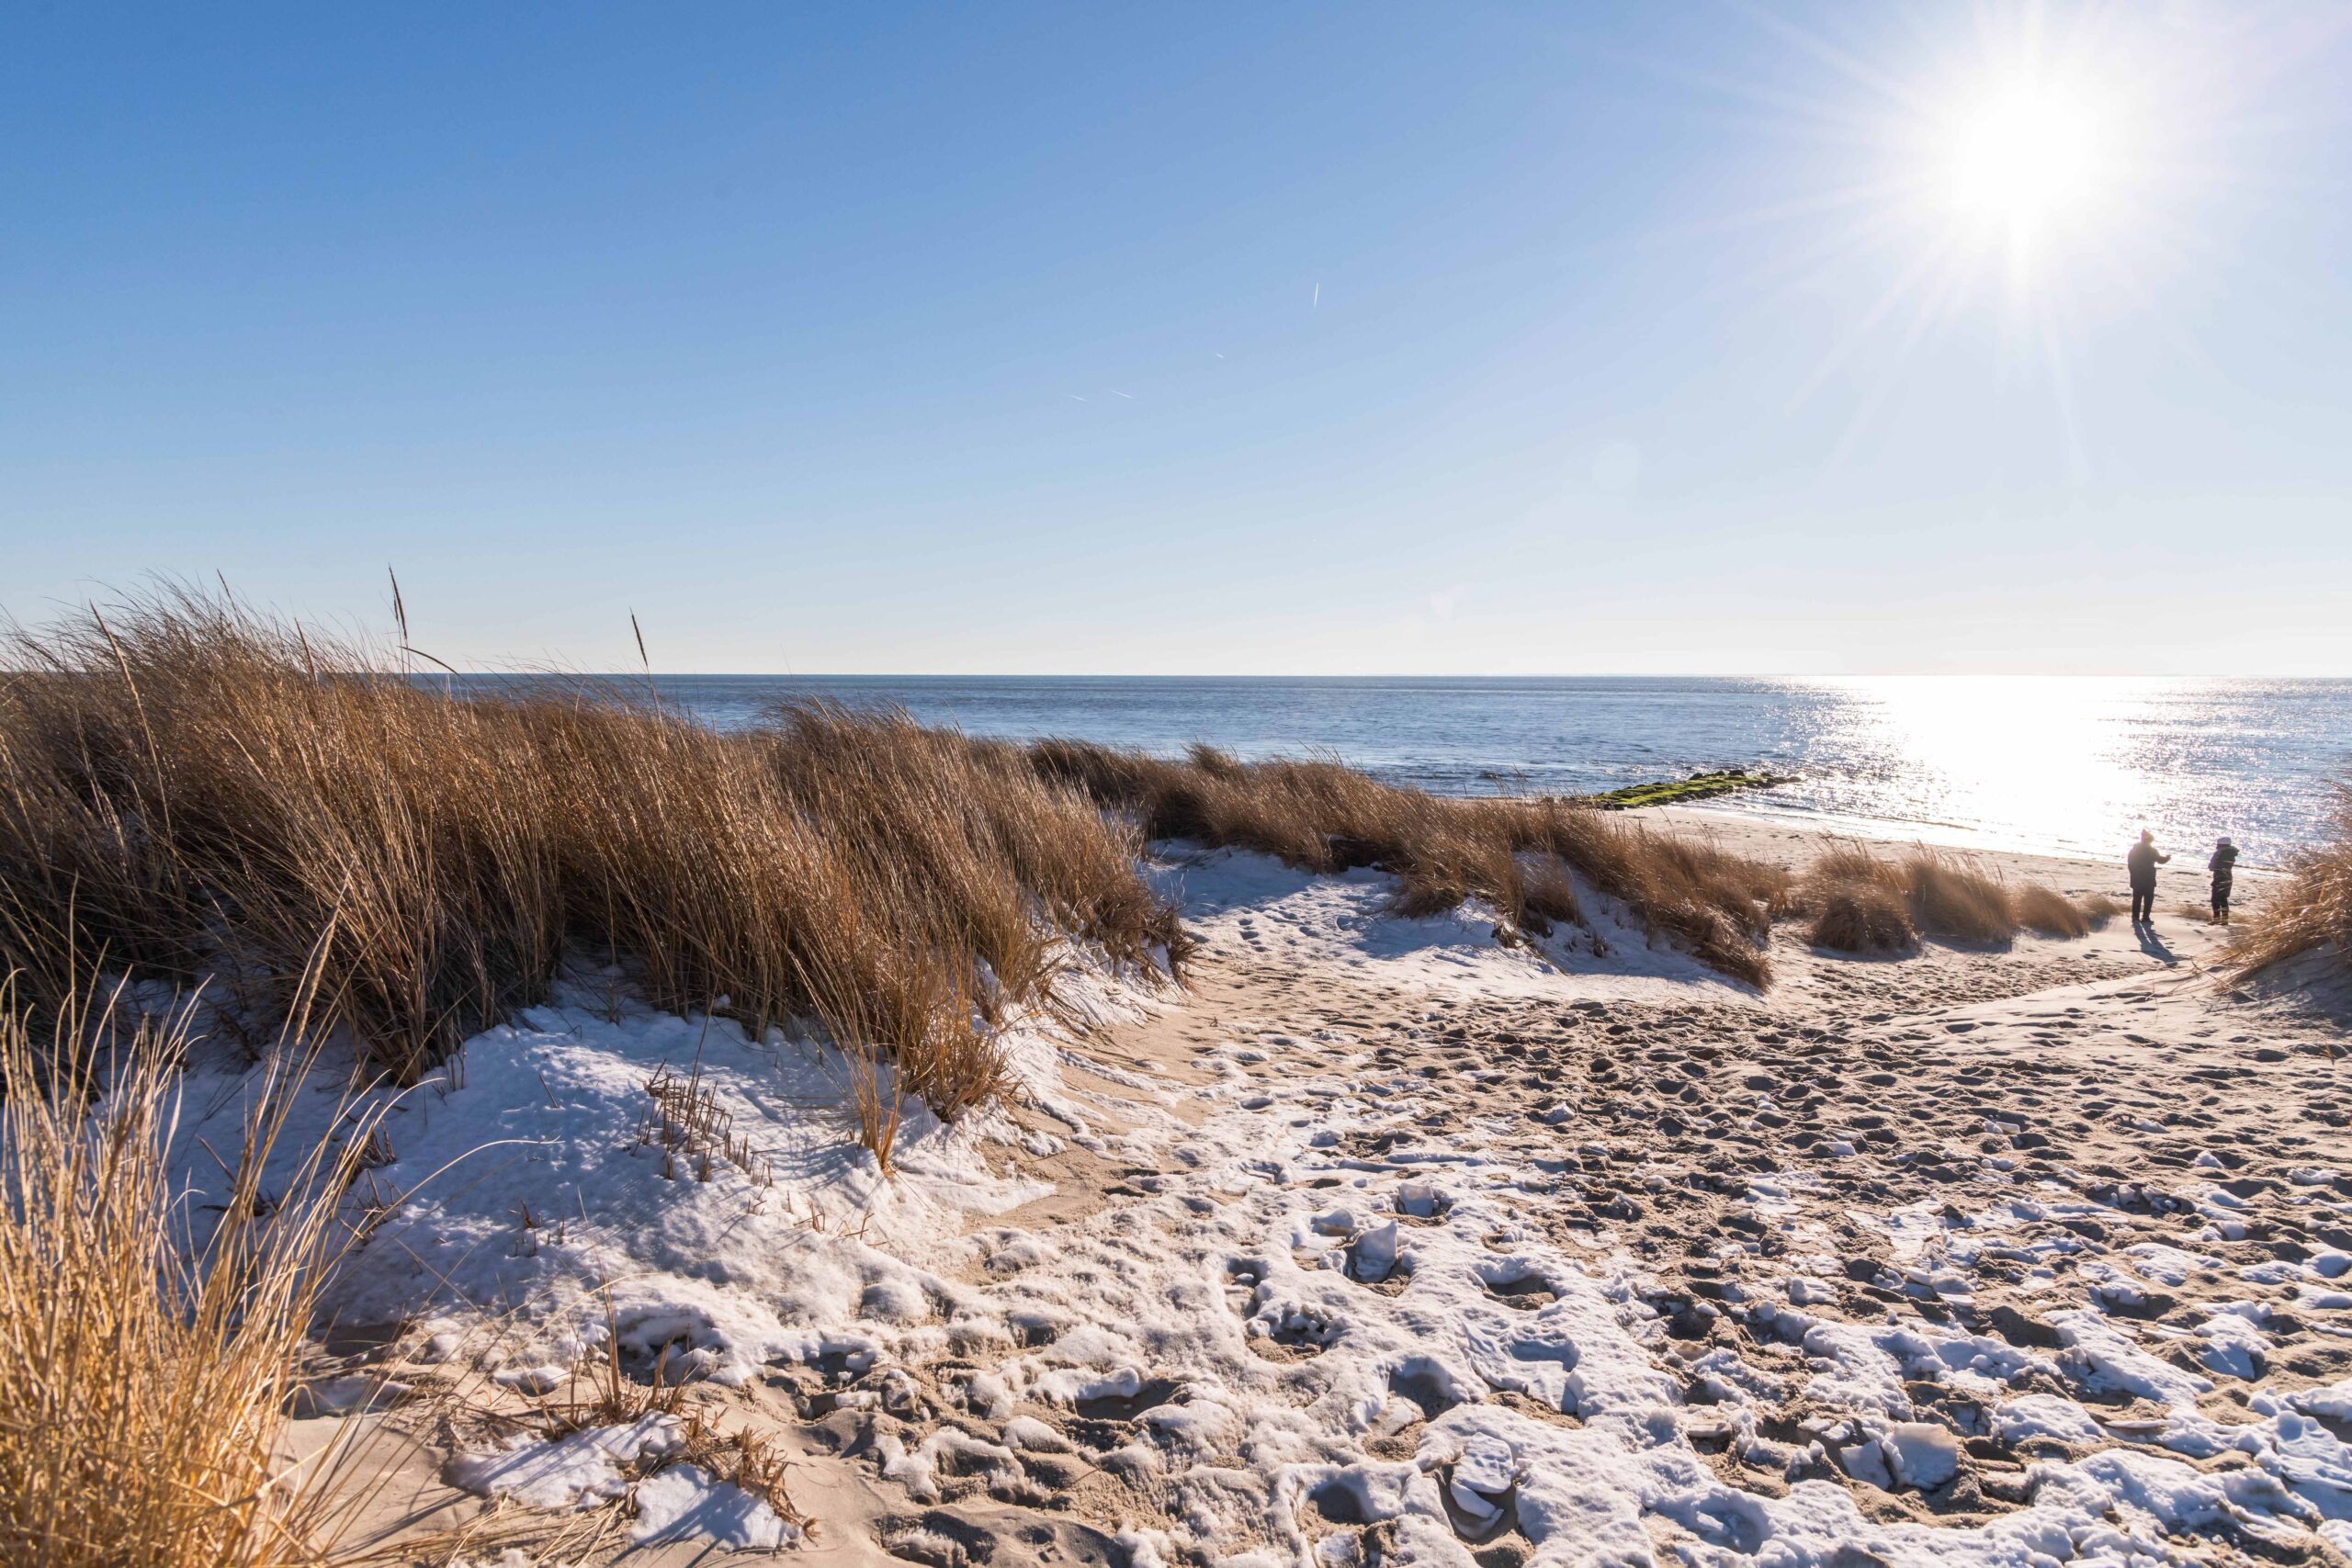 Snow on the sand and in the dunes at the beach with the ocean and two people in the distance on a sunny day with a clear blue sky